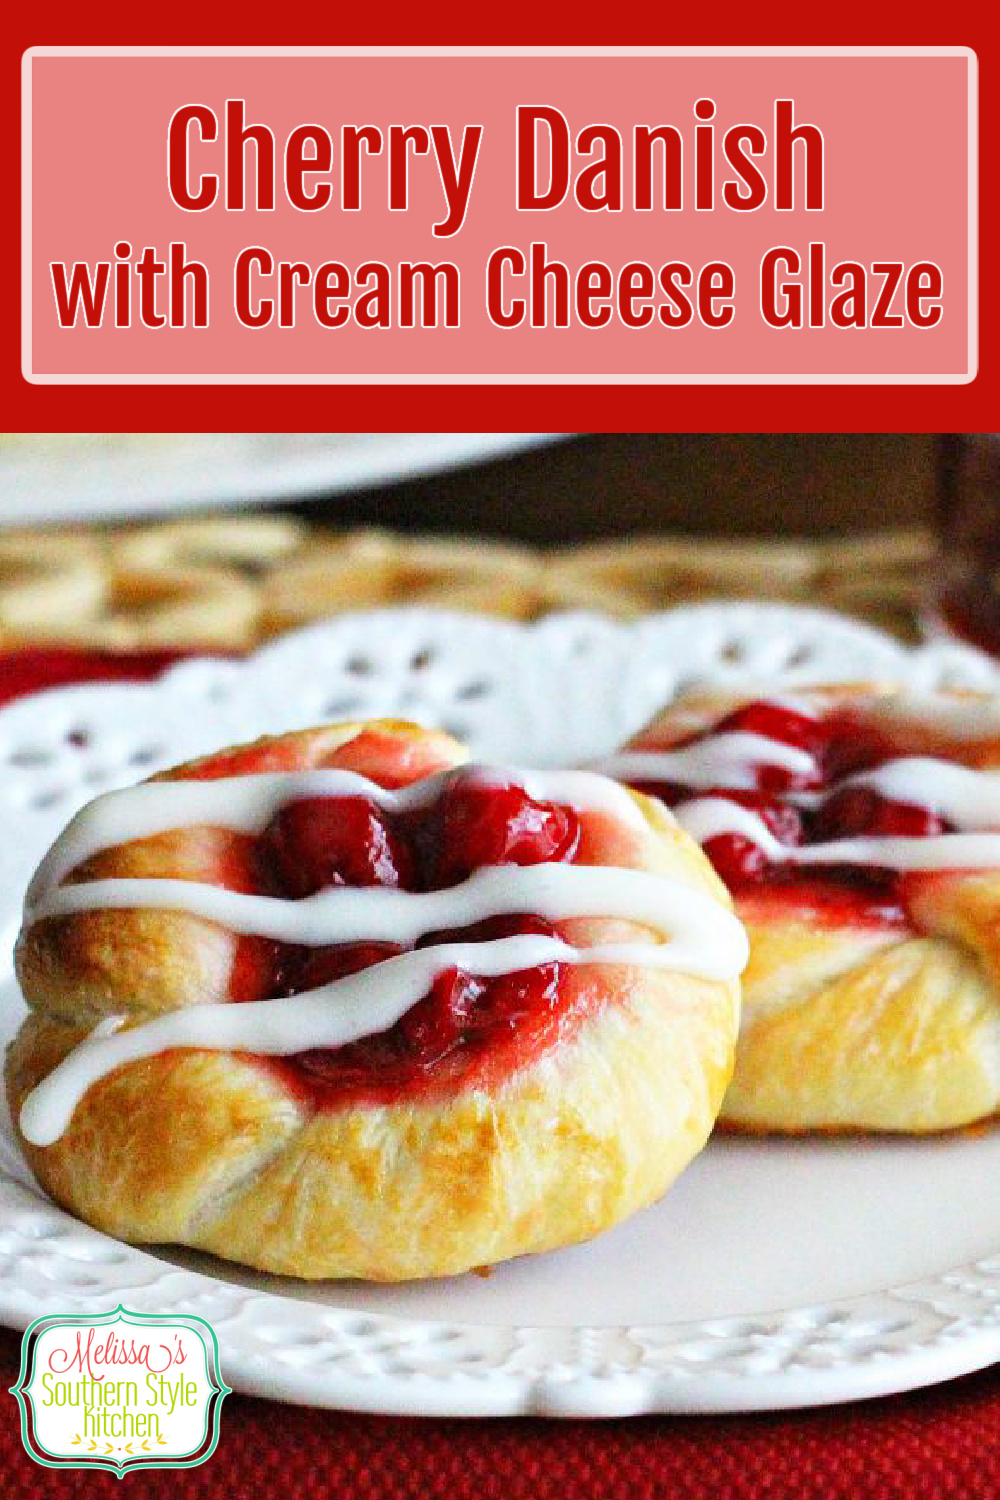 Transform frozen dinner rolls into these oh-so-delicious Cherry Danish with Cream Cheese Glaze #cherrydanish #cherry #cherrydesserts #pastries #brunch #breakfast #holidaybrunch #dinnerrolls #easyrecipes #southernrecipes #southernfood via @melissasssk